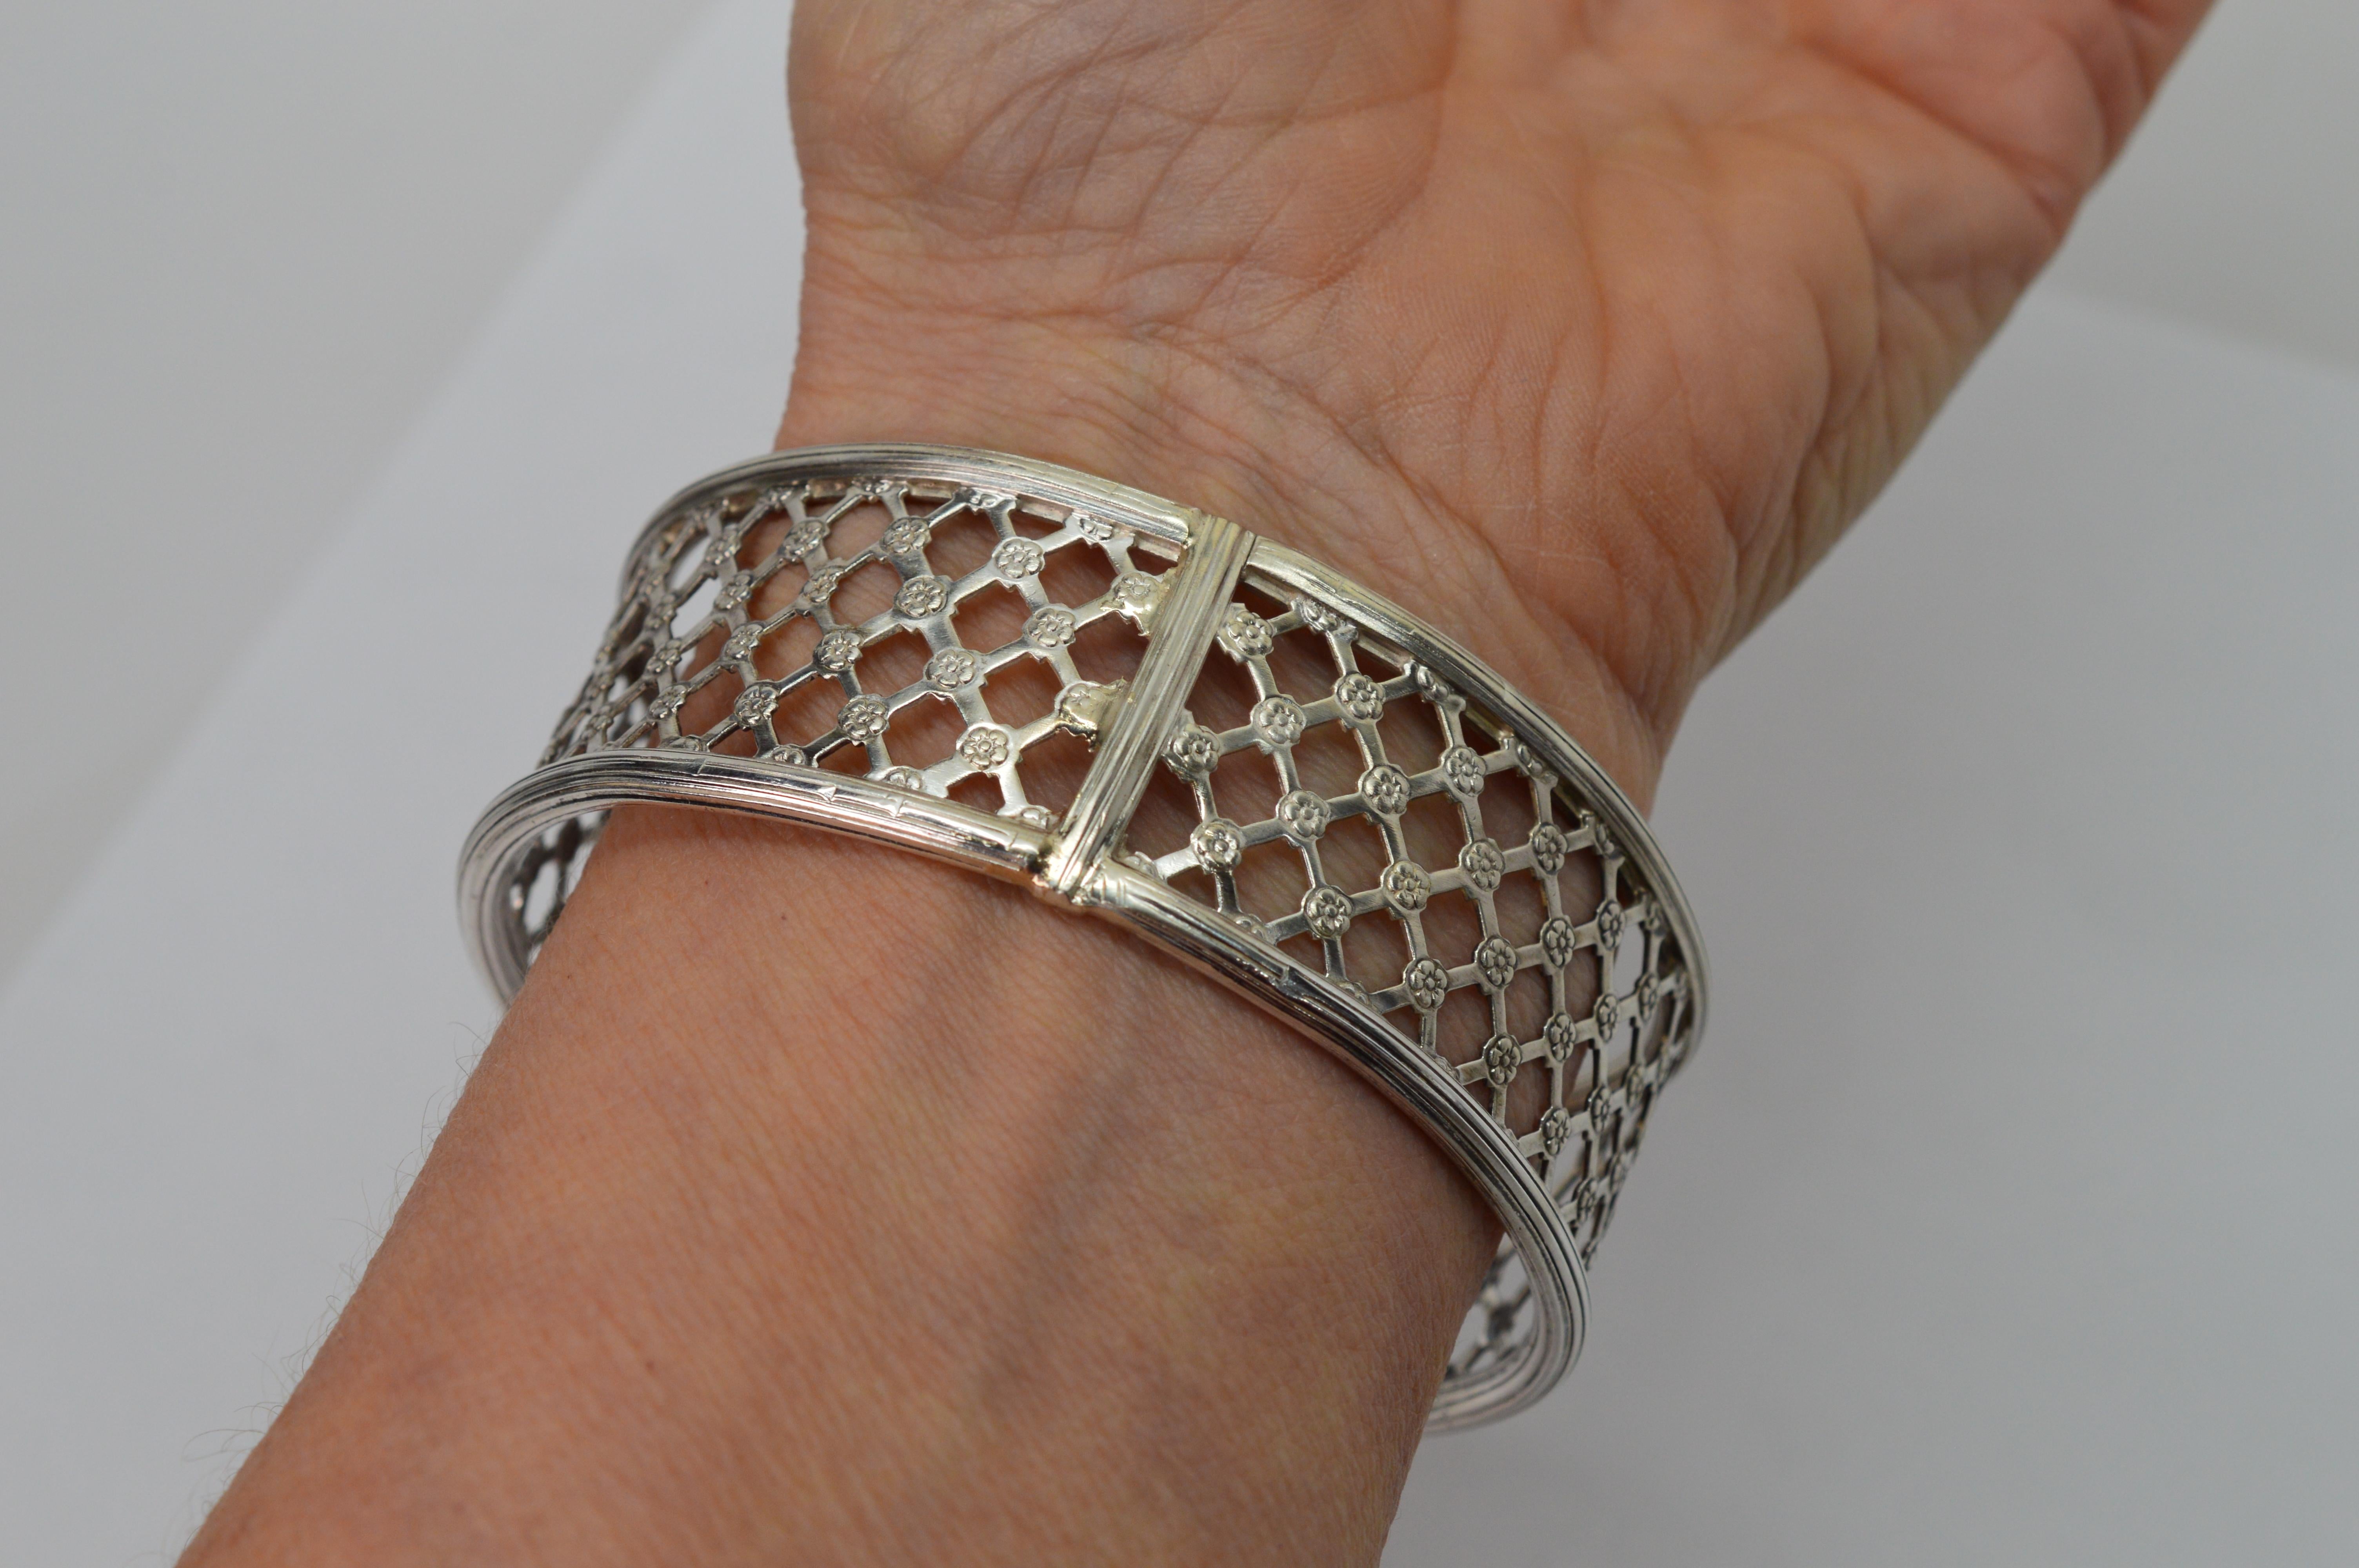 Lattice Lace Sterling Silver Bangle Bracelet In Good Condition For Sale In Mount Kisco, NY